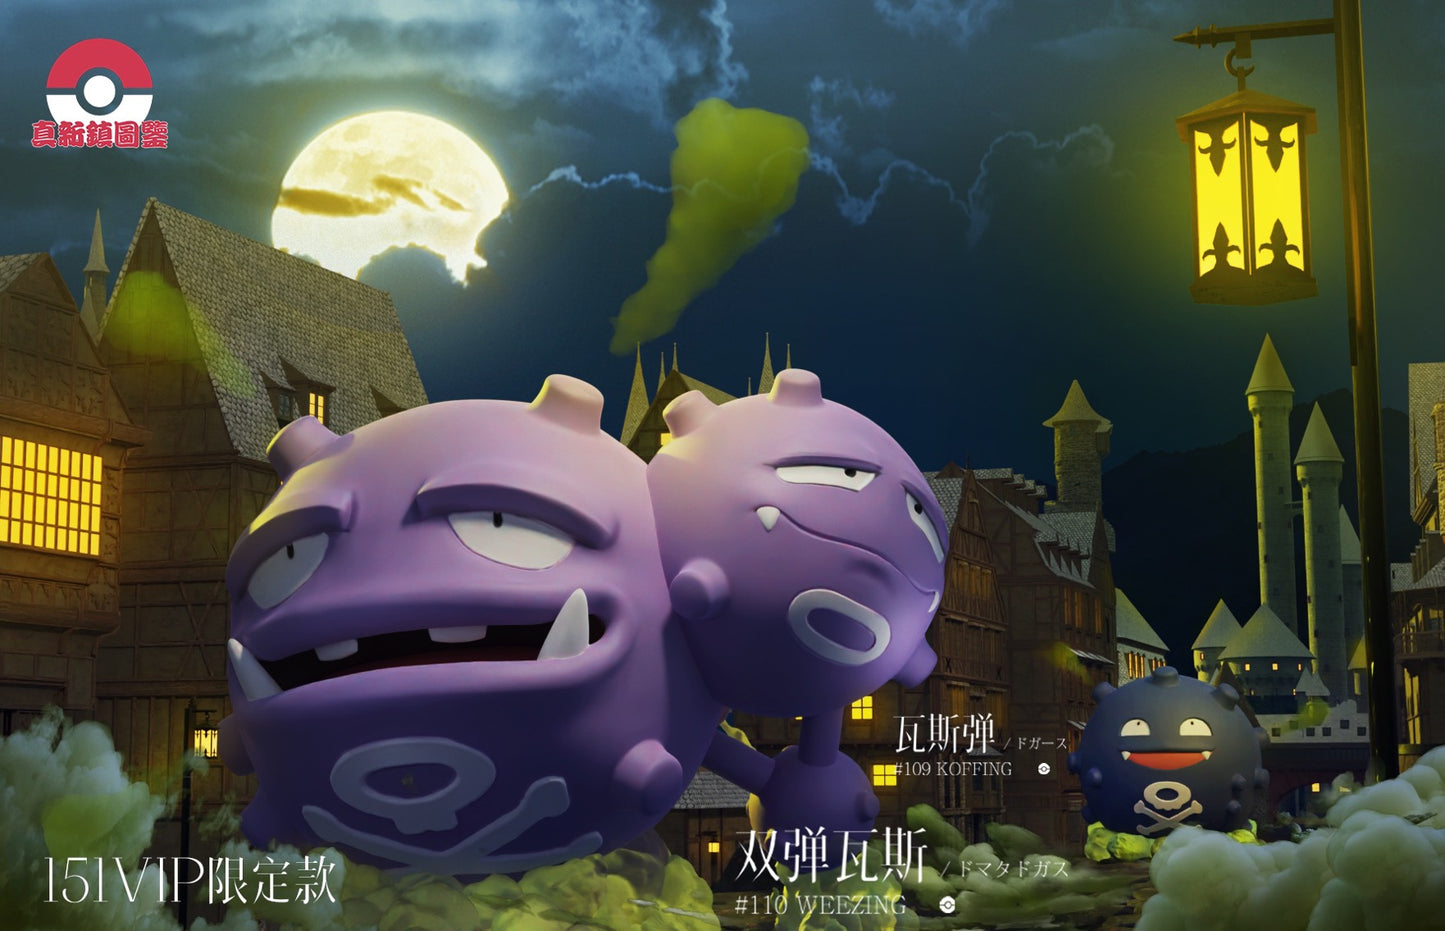 〖Make Up The Balance〗Pokemon Scale World Koffing Weezing #109 #110 1:20 - Pallet Town Studio